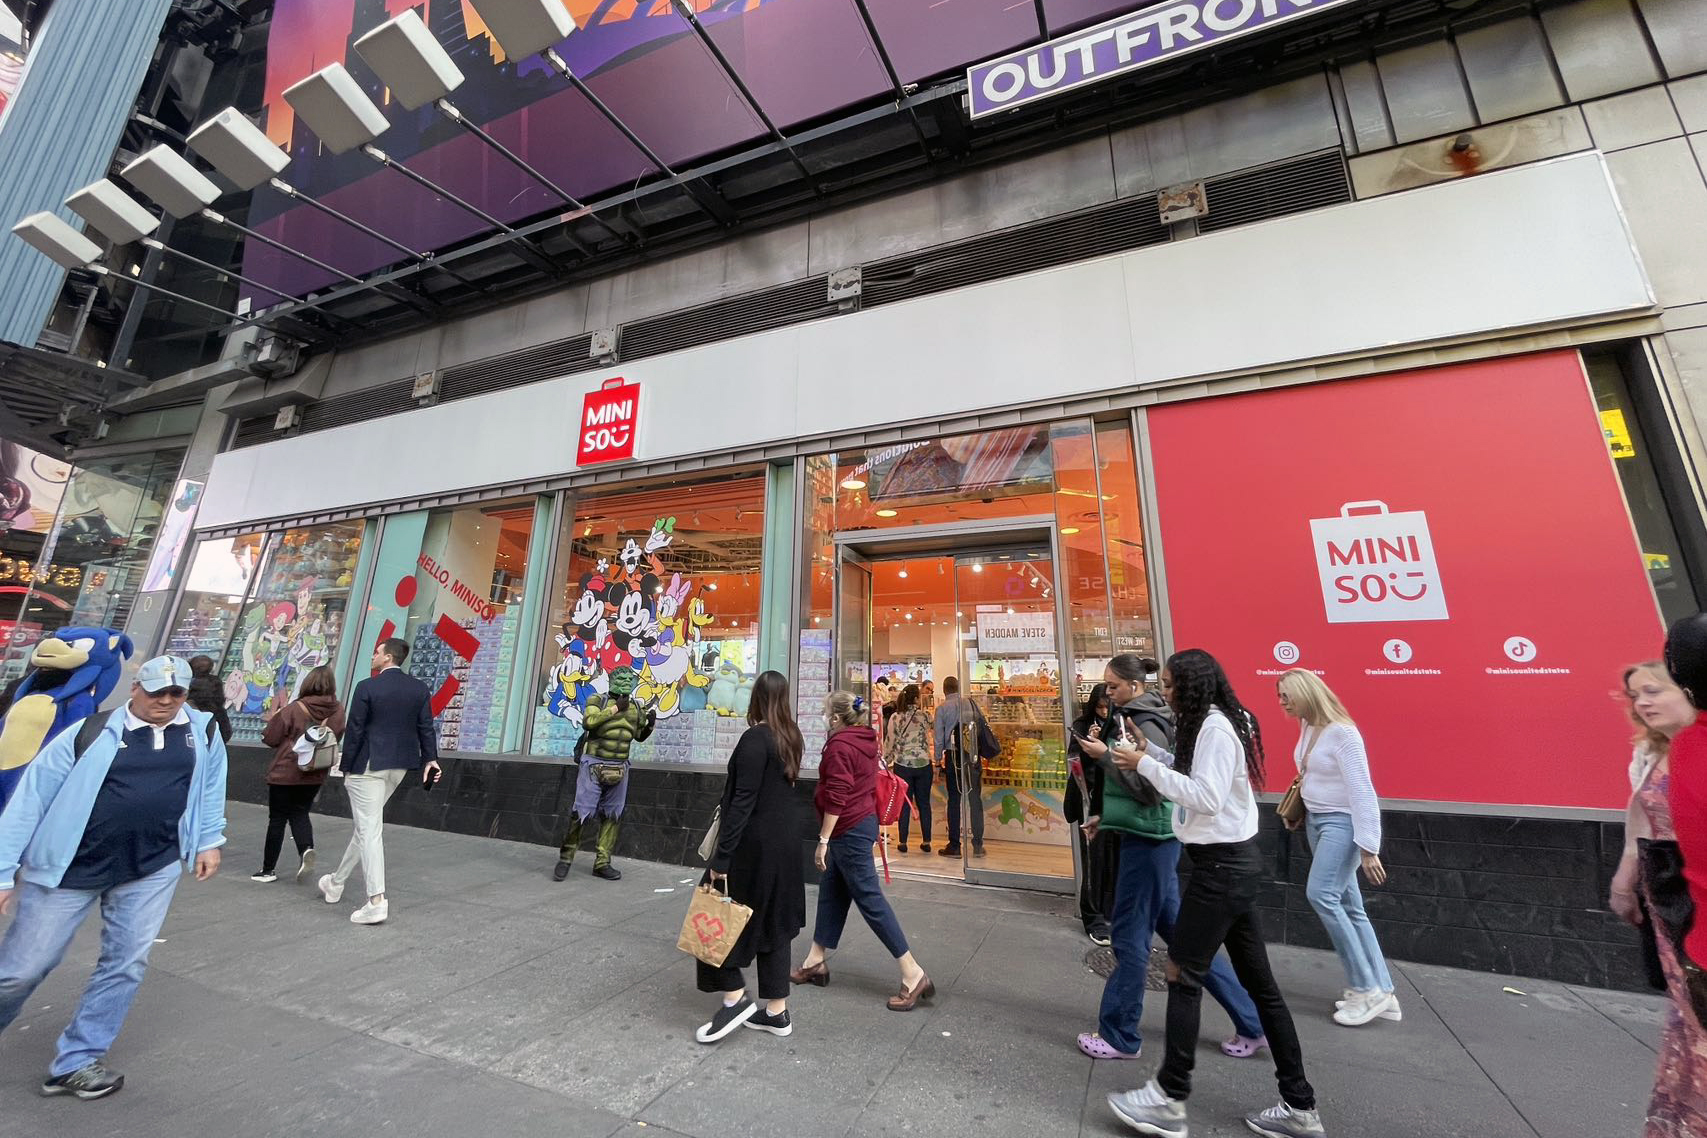 MINISO Sets Up Innovative Flagship Stores Globally, Featuring